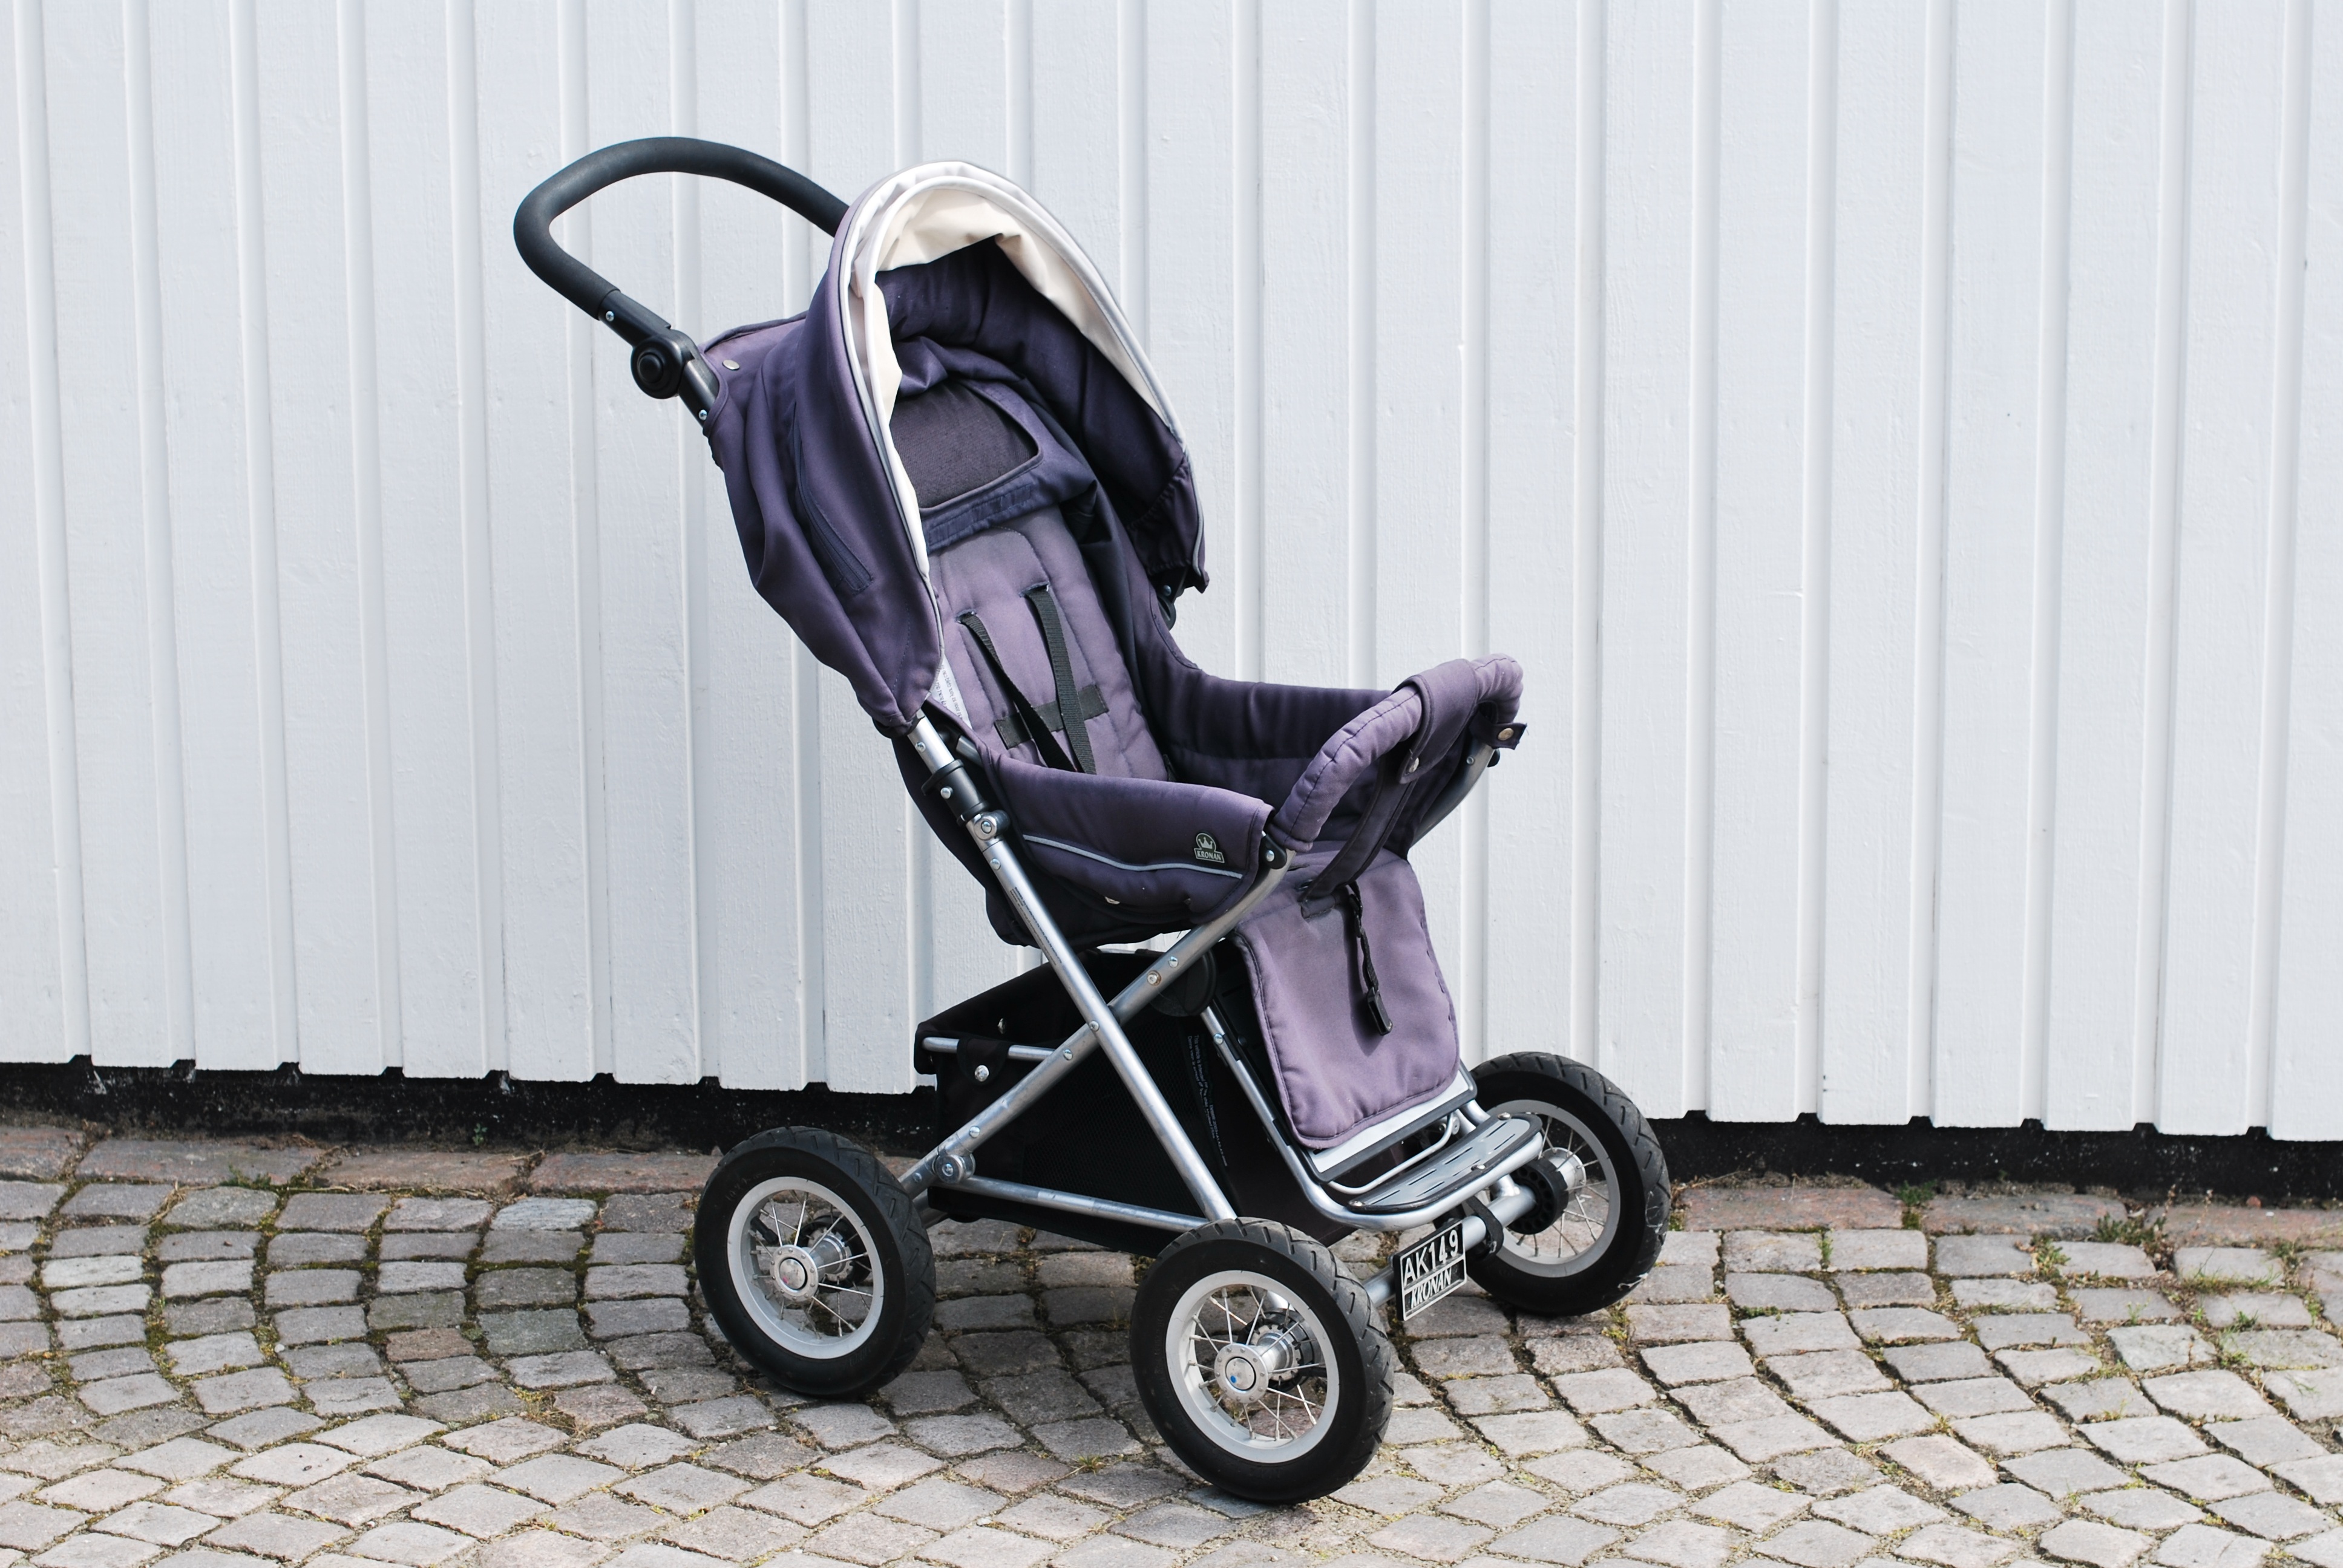 Stroller and Pram - Difference